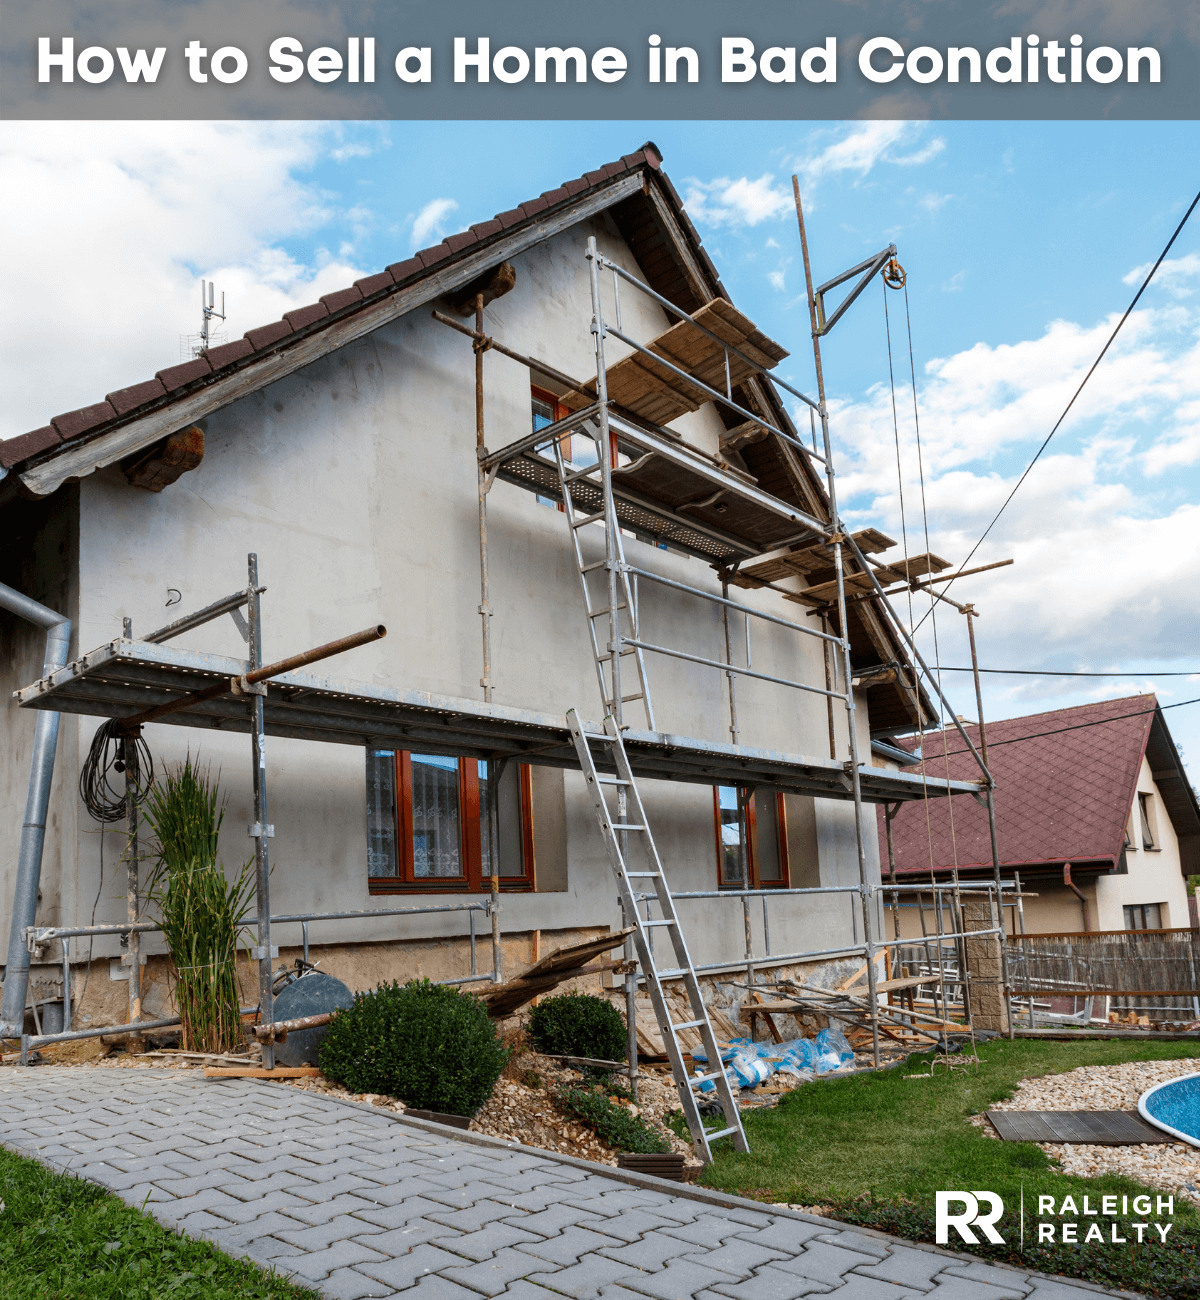 How to Sell a Home in Bad Condition